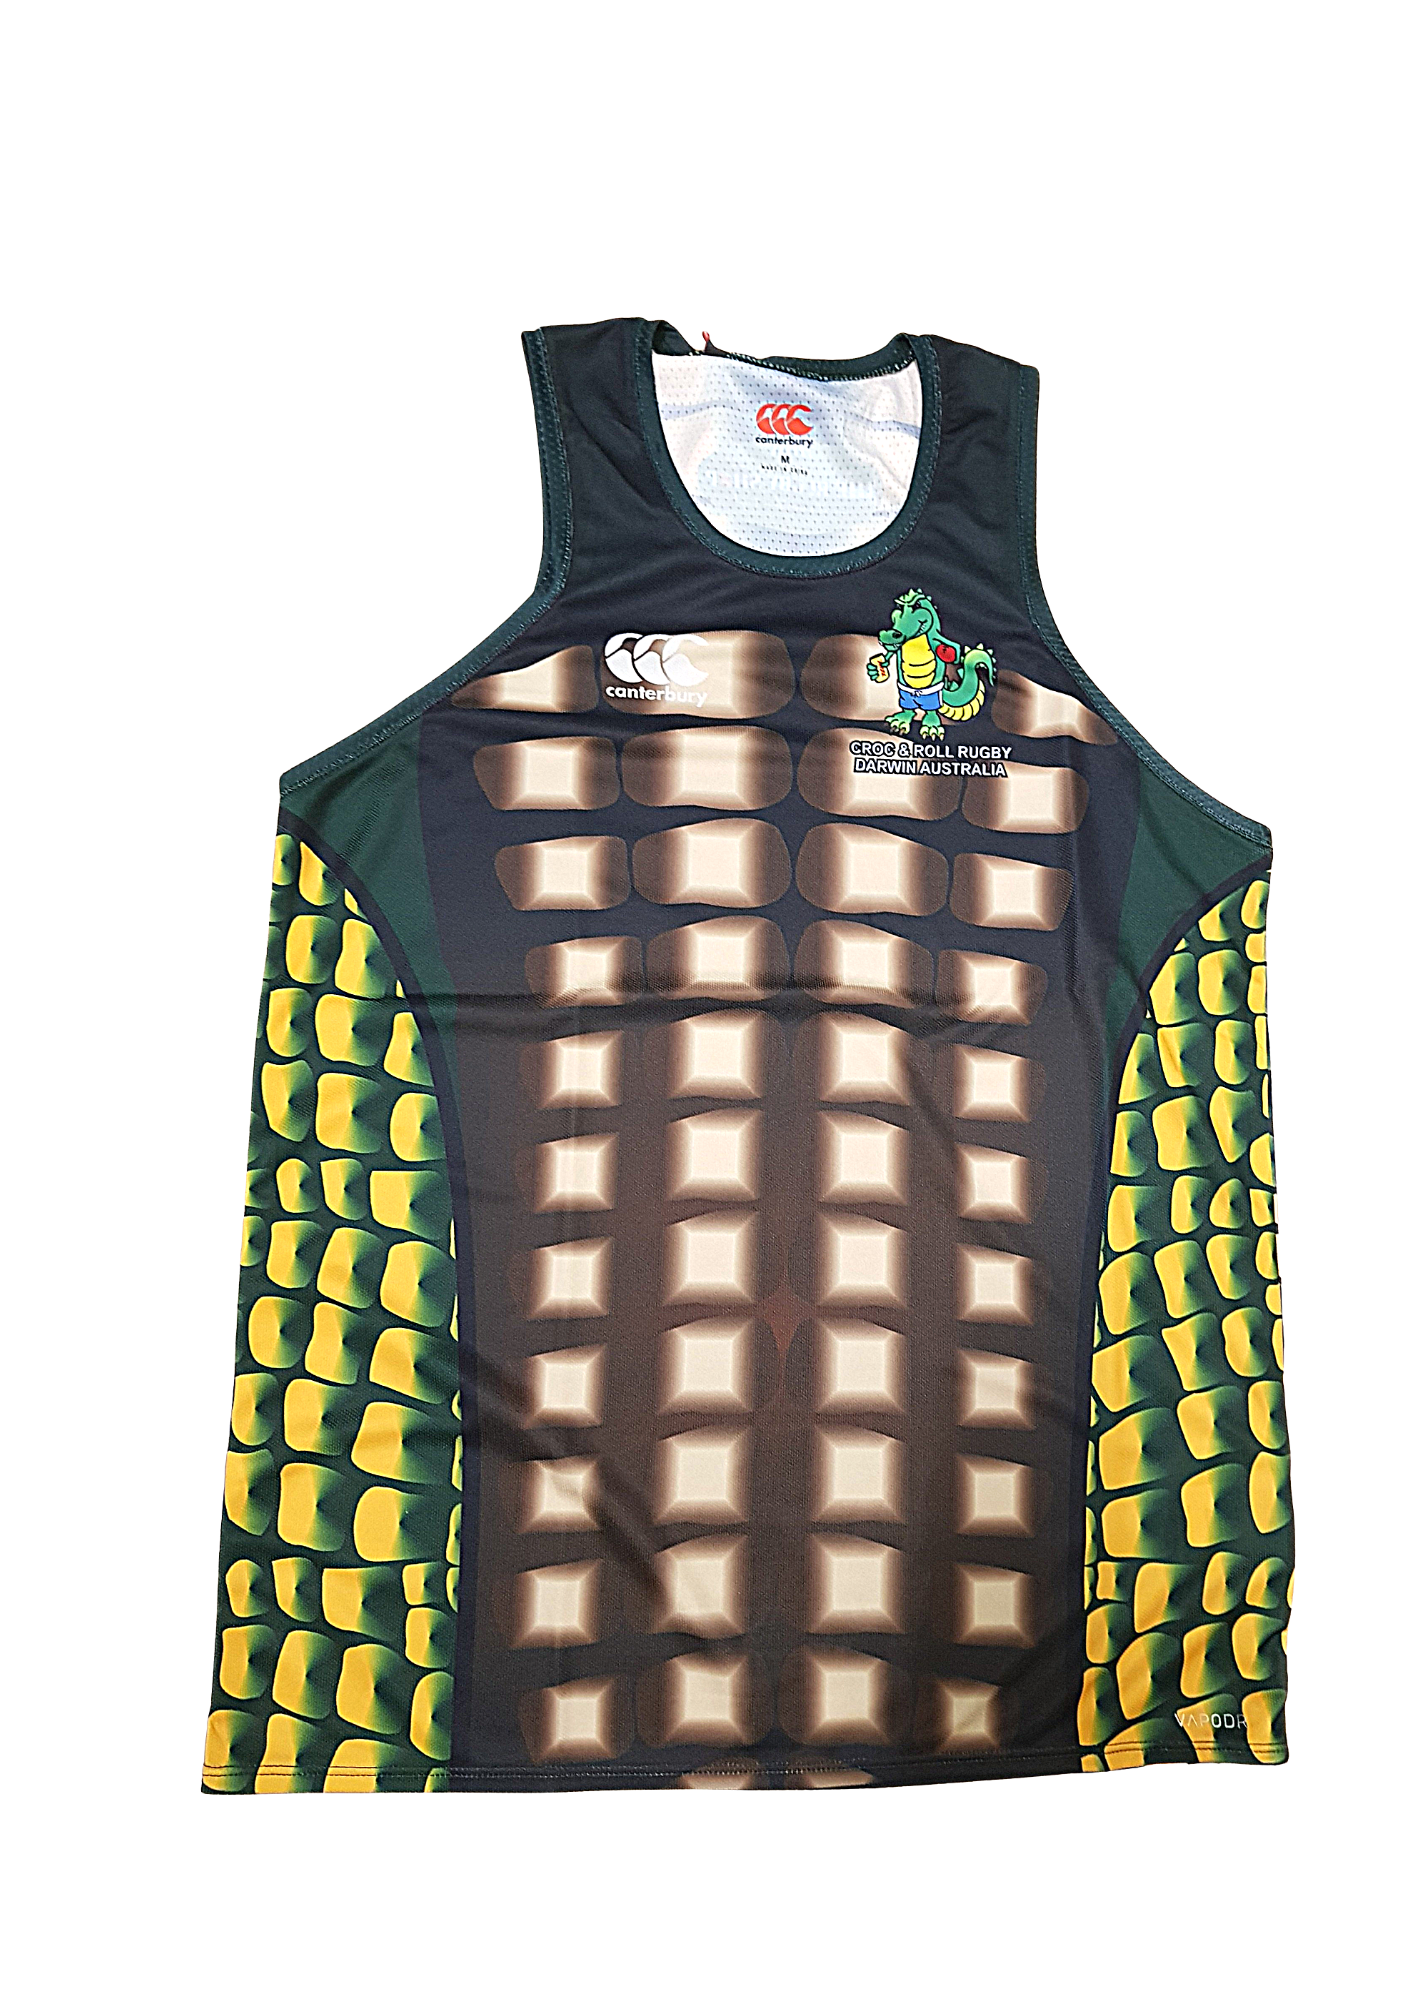 Croc & Roll Rugby Singlet - The Rugby Shop Darwin